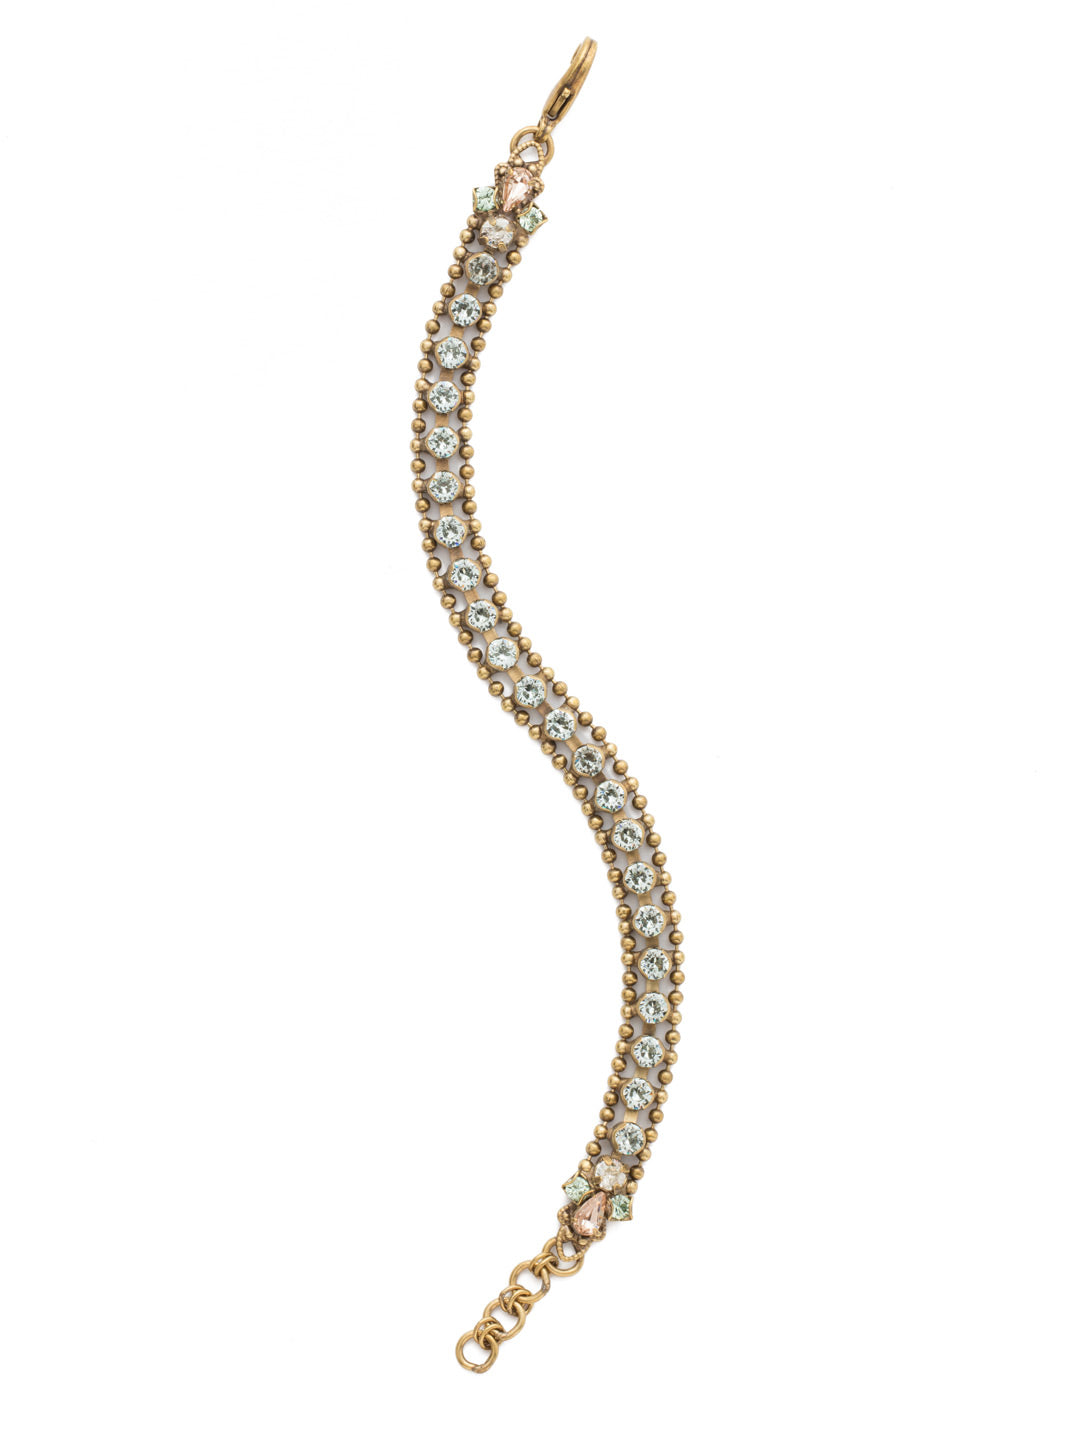 Nerine Bracelet - BDS34AGWW - <p>A single strand of crystals set between two rows of ball chain will add a touch of modern glamour to any look. From Sorrelli's Washed Waterfront collection in our Antique Gold-tone finish.</p>